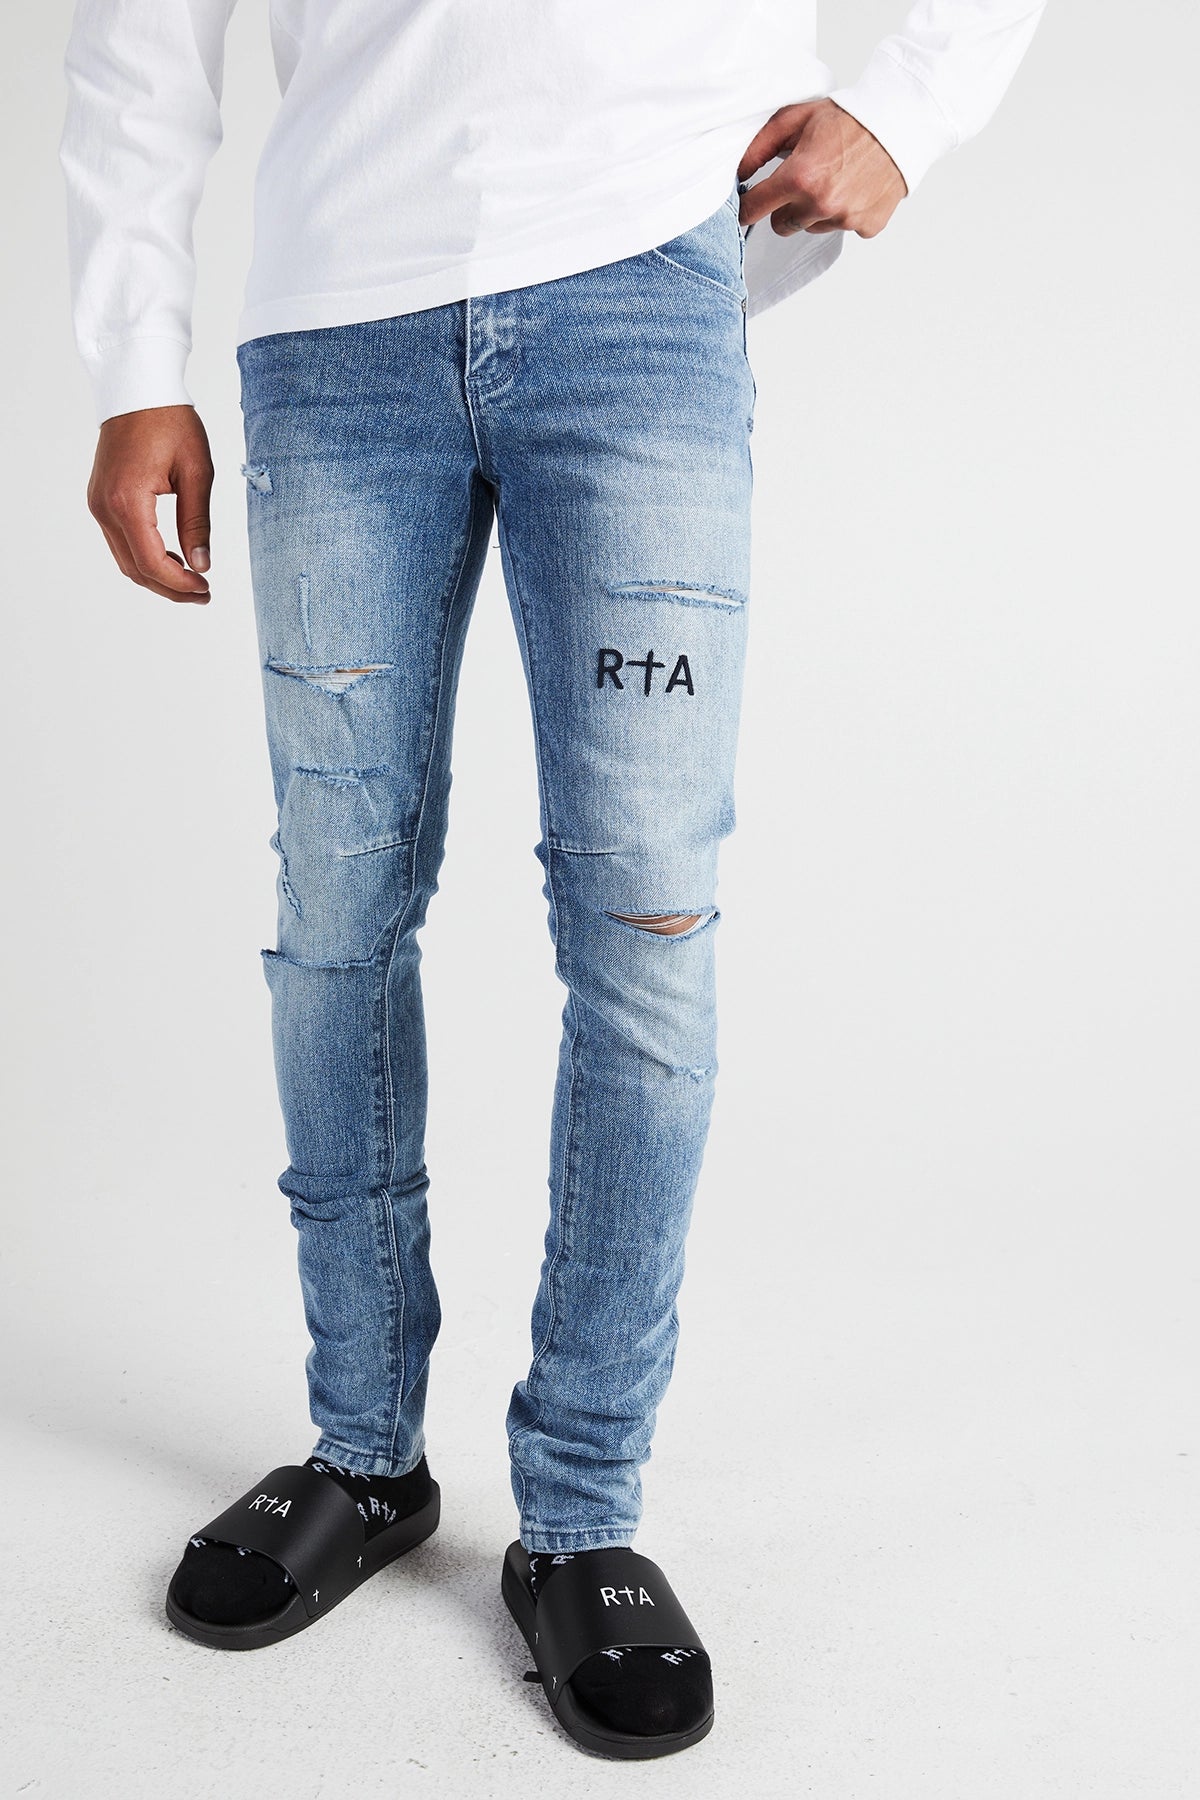 Rta Pinstripe Zip Up Pants In Black And Silver - 24 - Gem